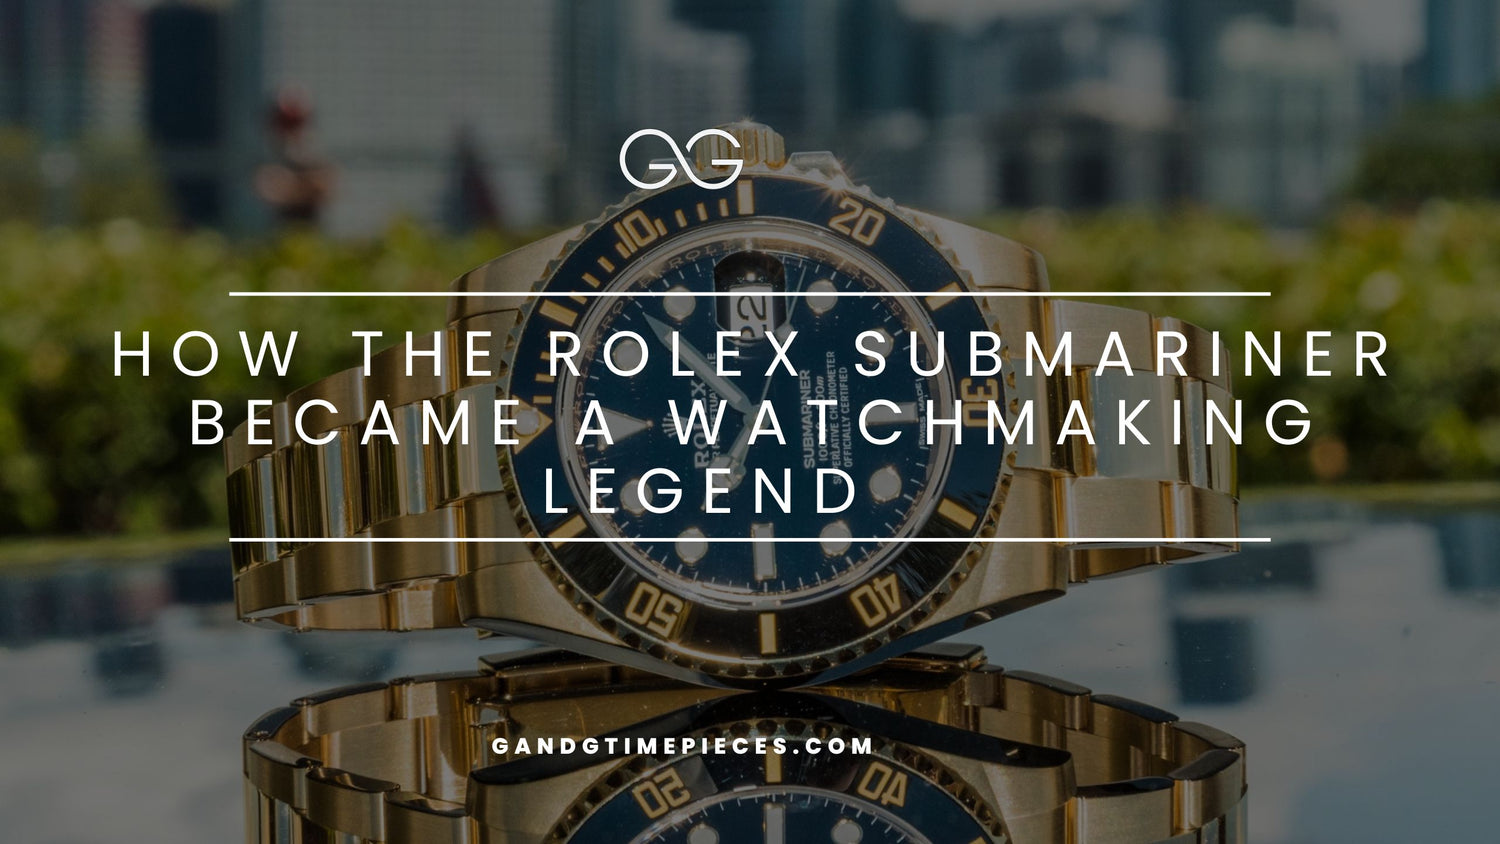 How the Rolex Submariner Became a Watchmaking Legend